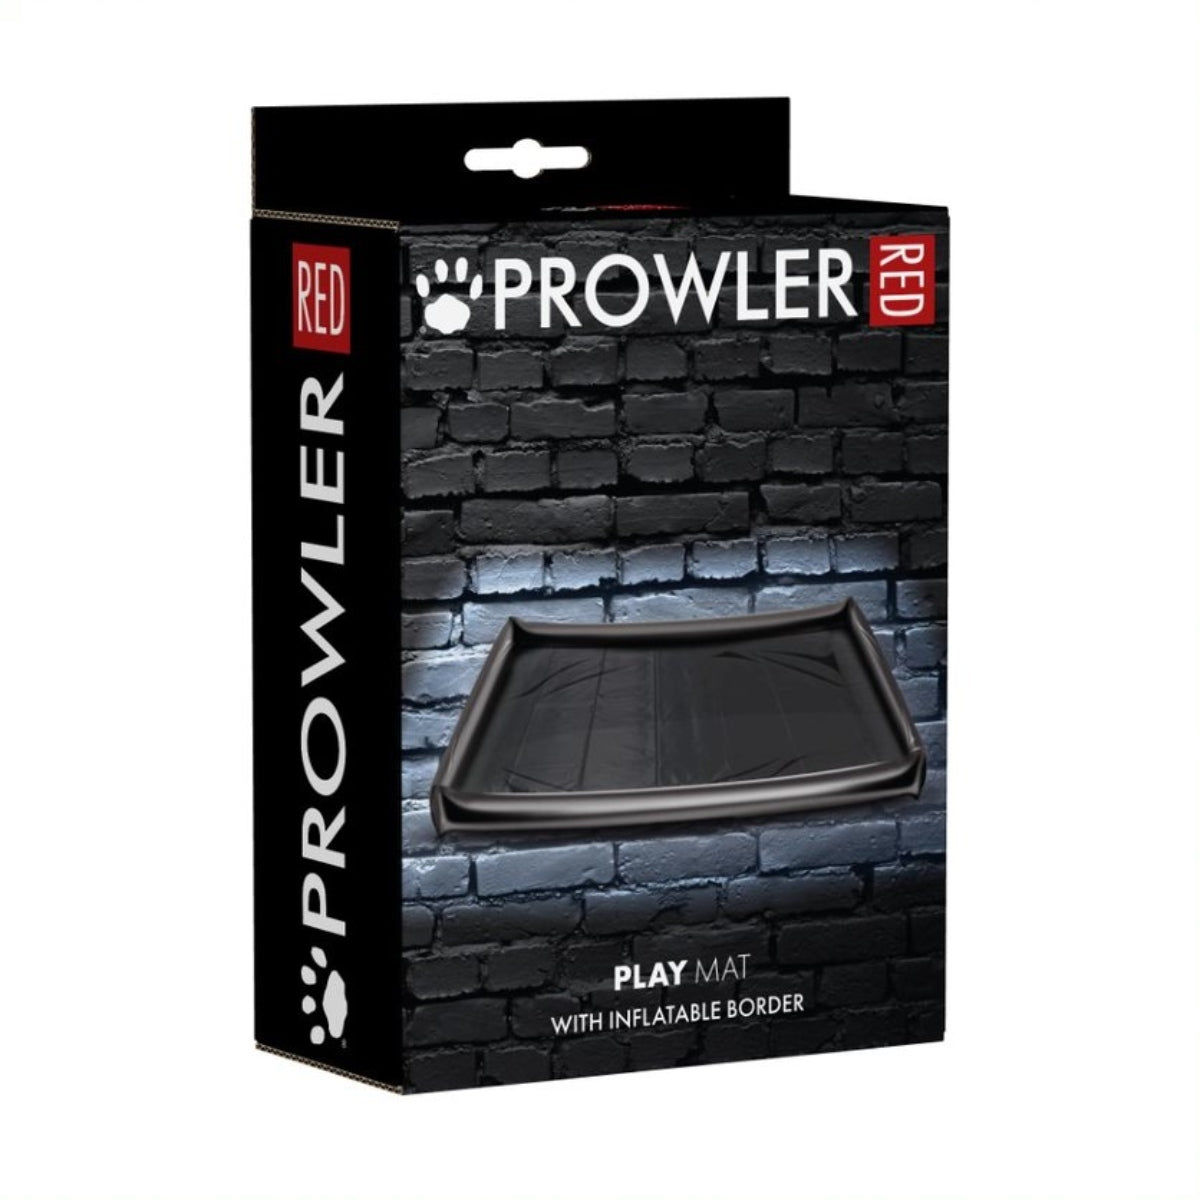 Prowler RED Playmat With Inflatable Border Black